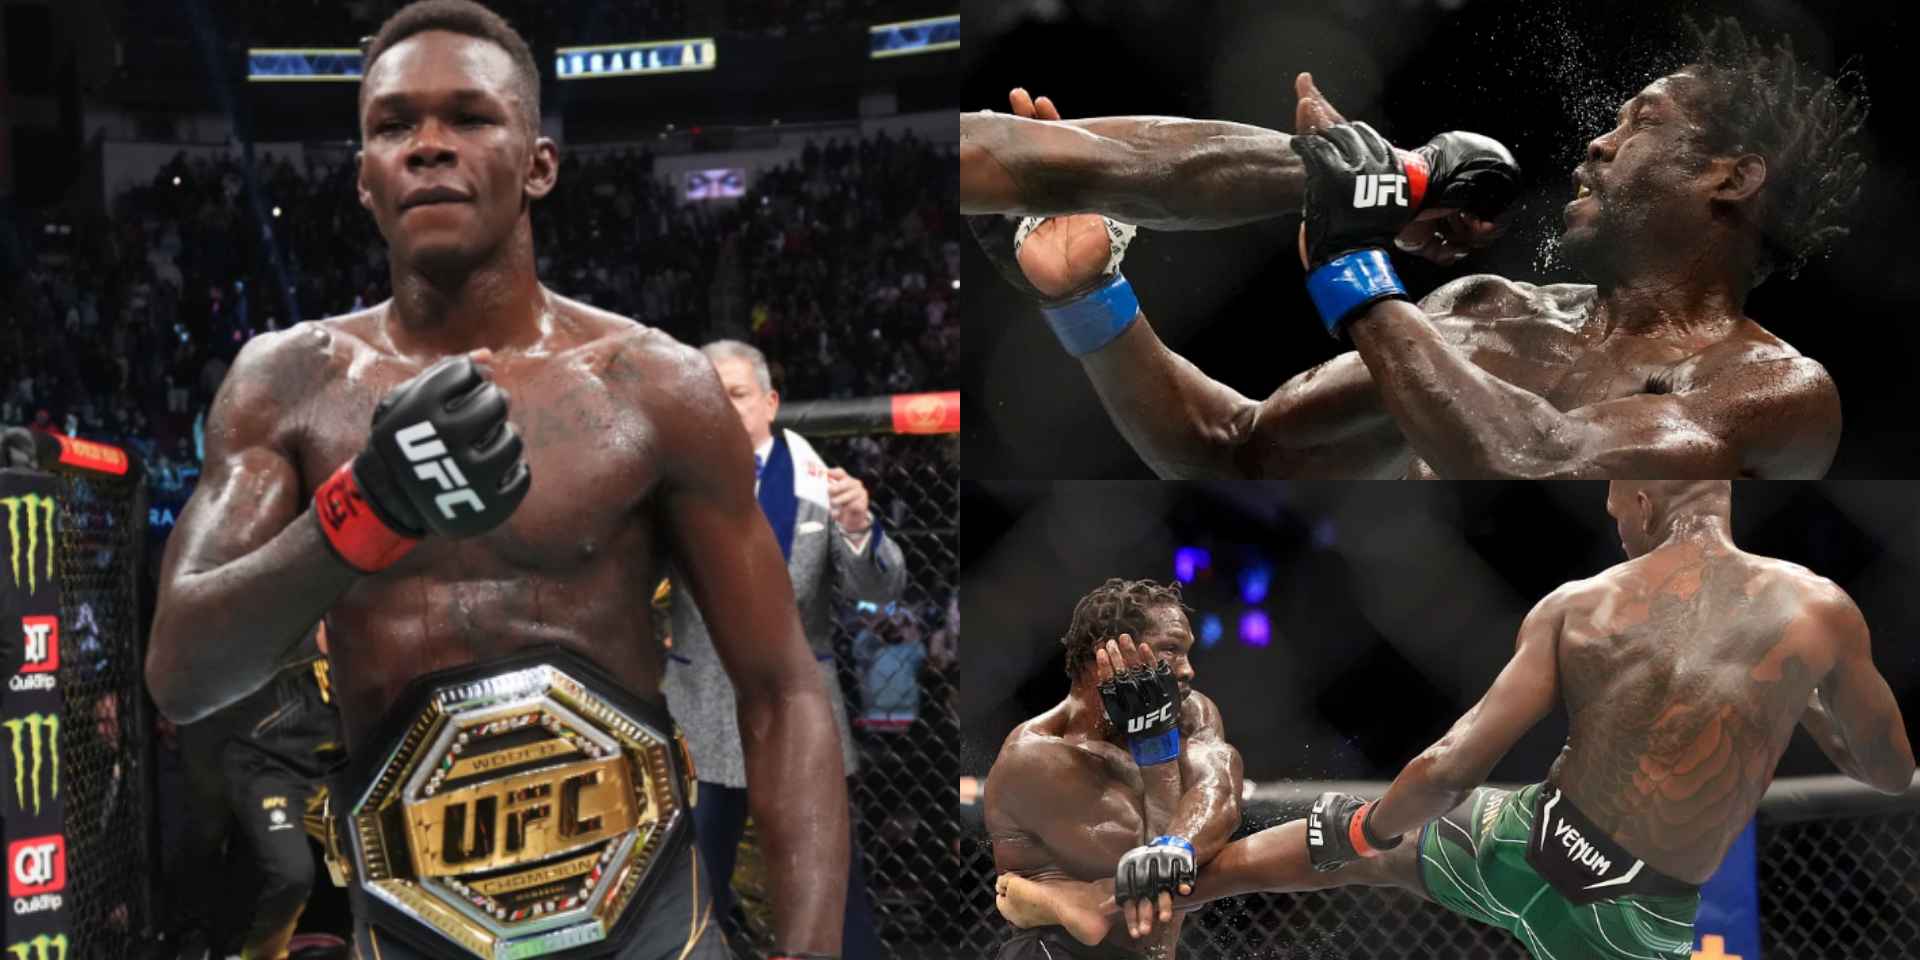 JUST IN: Israel Adesanya defeats Cannonier to retain UFC middleweight title